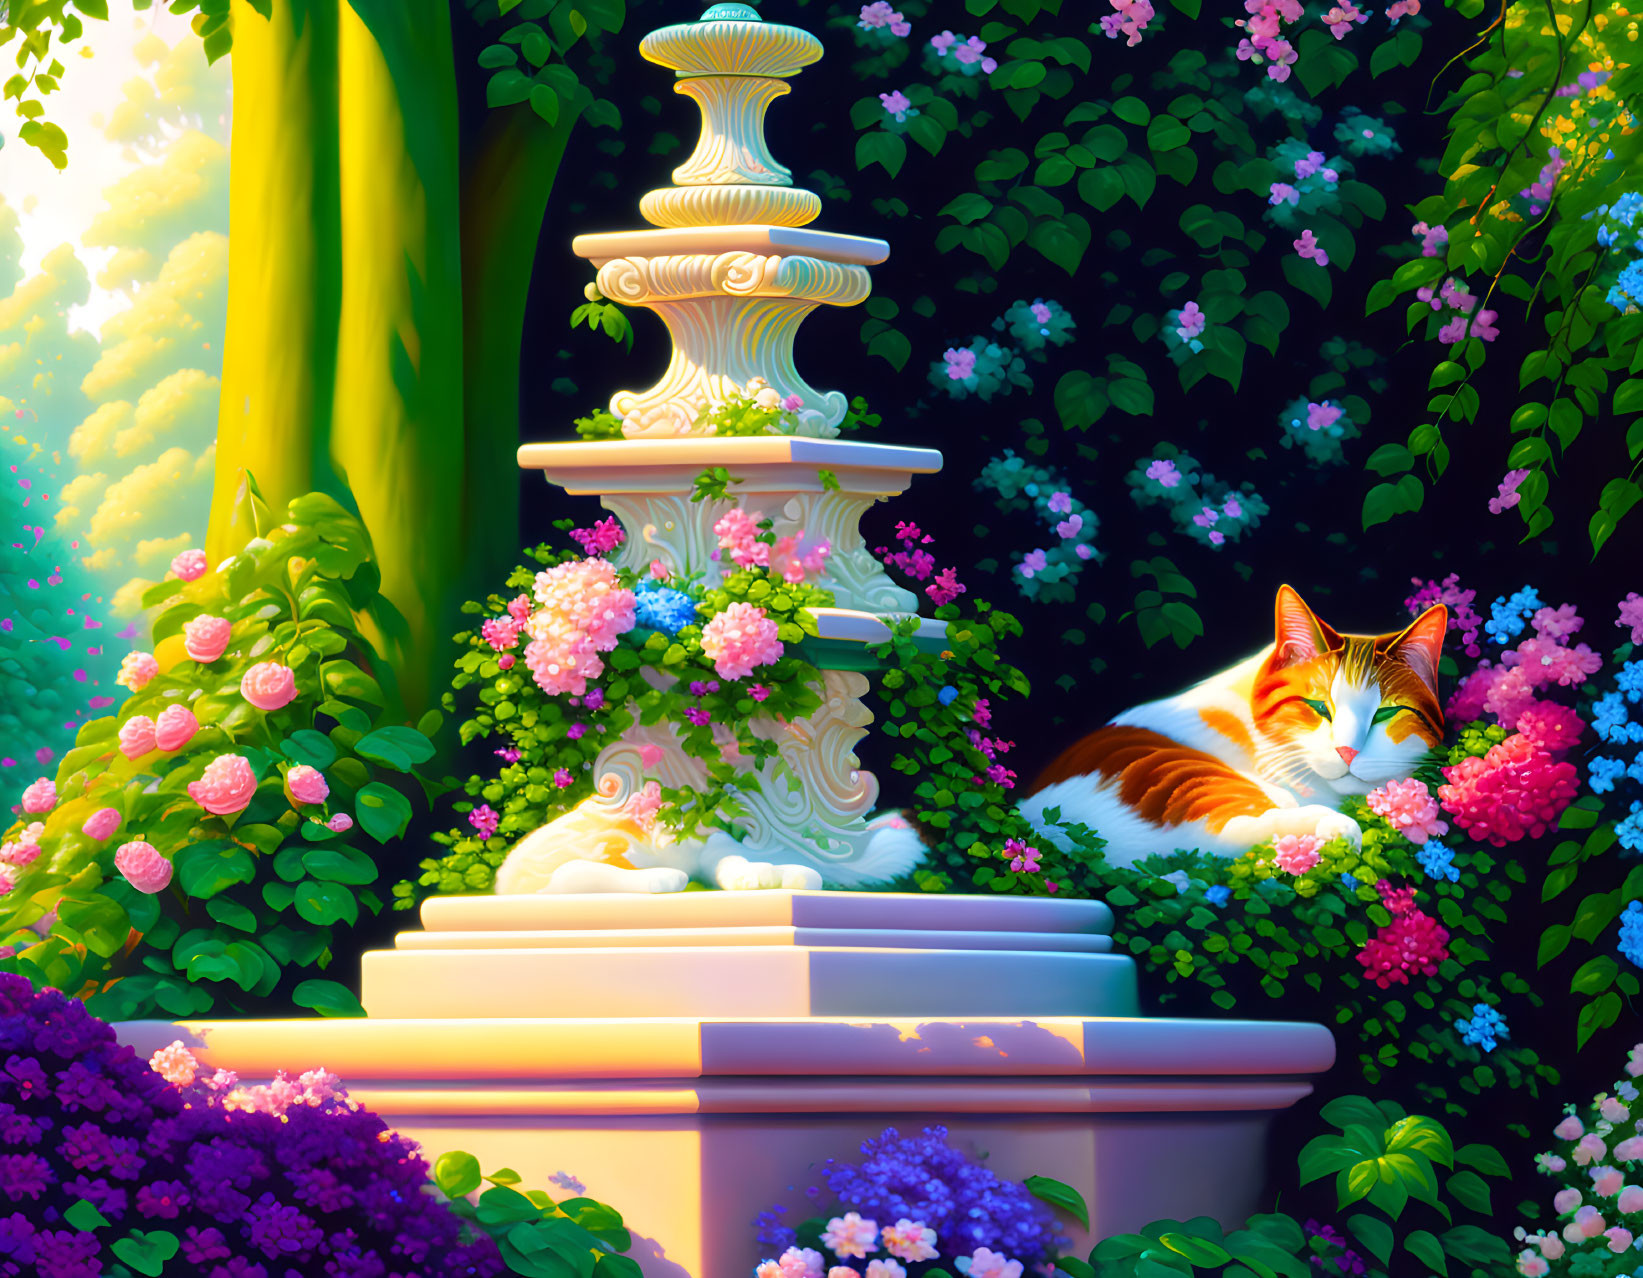 Orange and White Cat Relaxing by Classical Fountain and Flowers